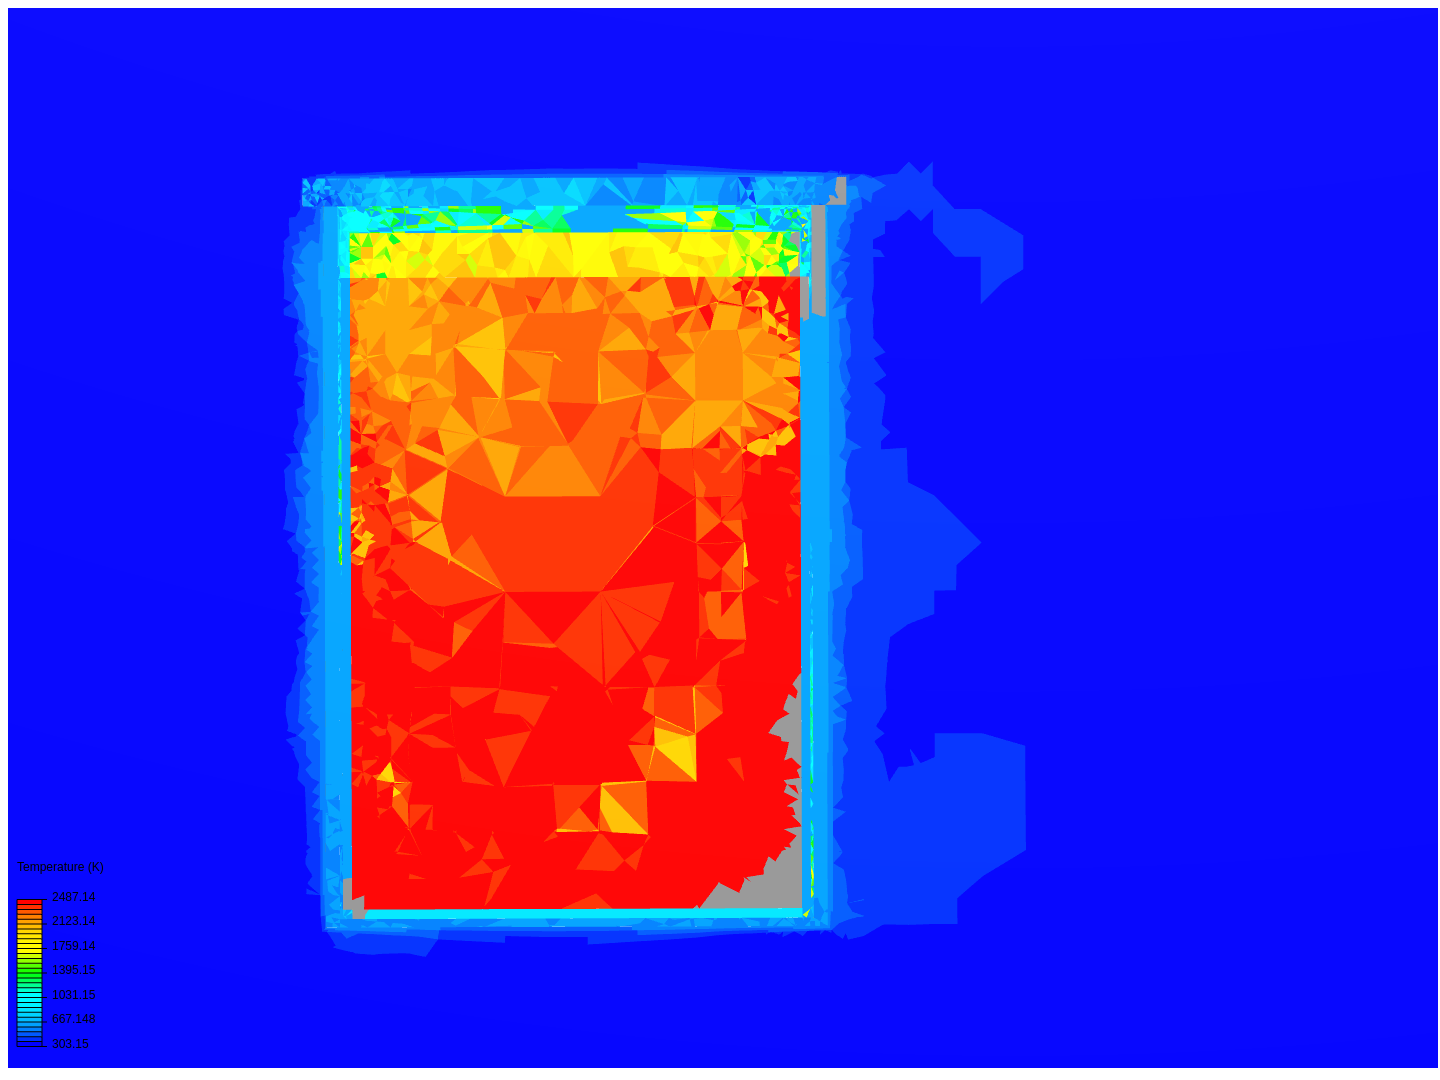 Battery thermal image